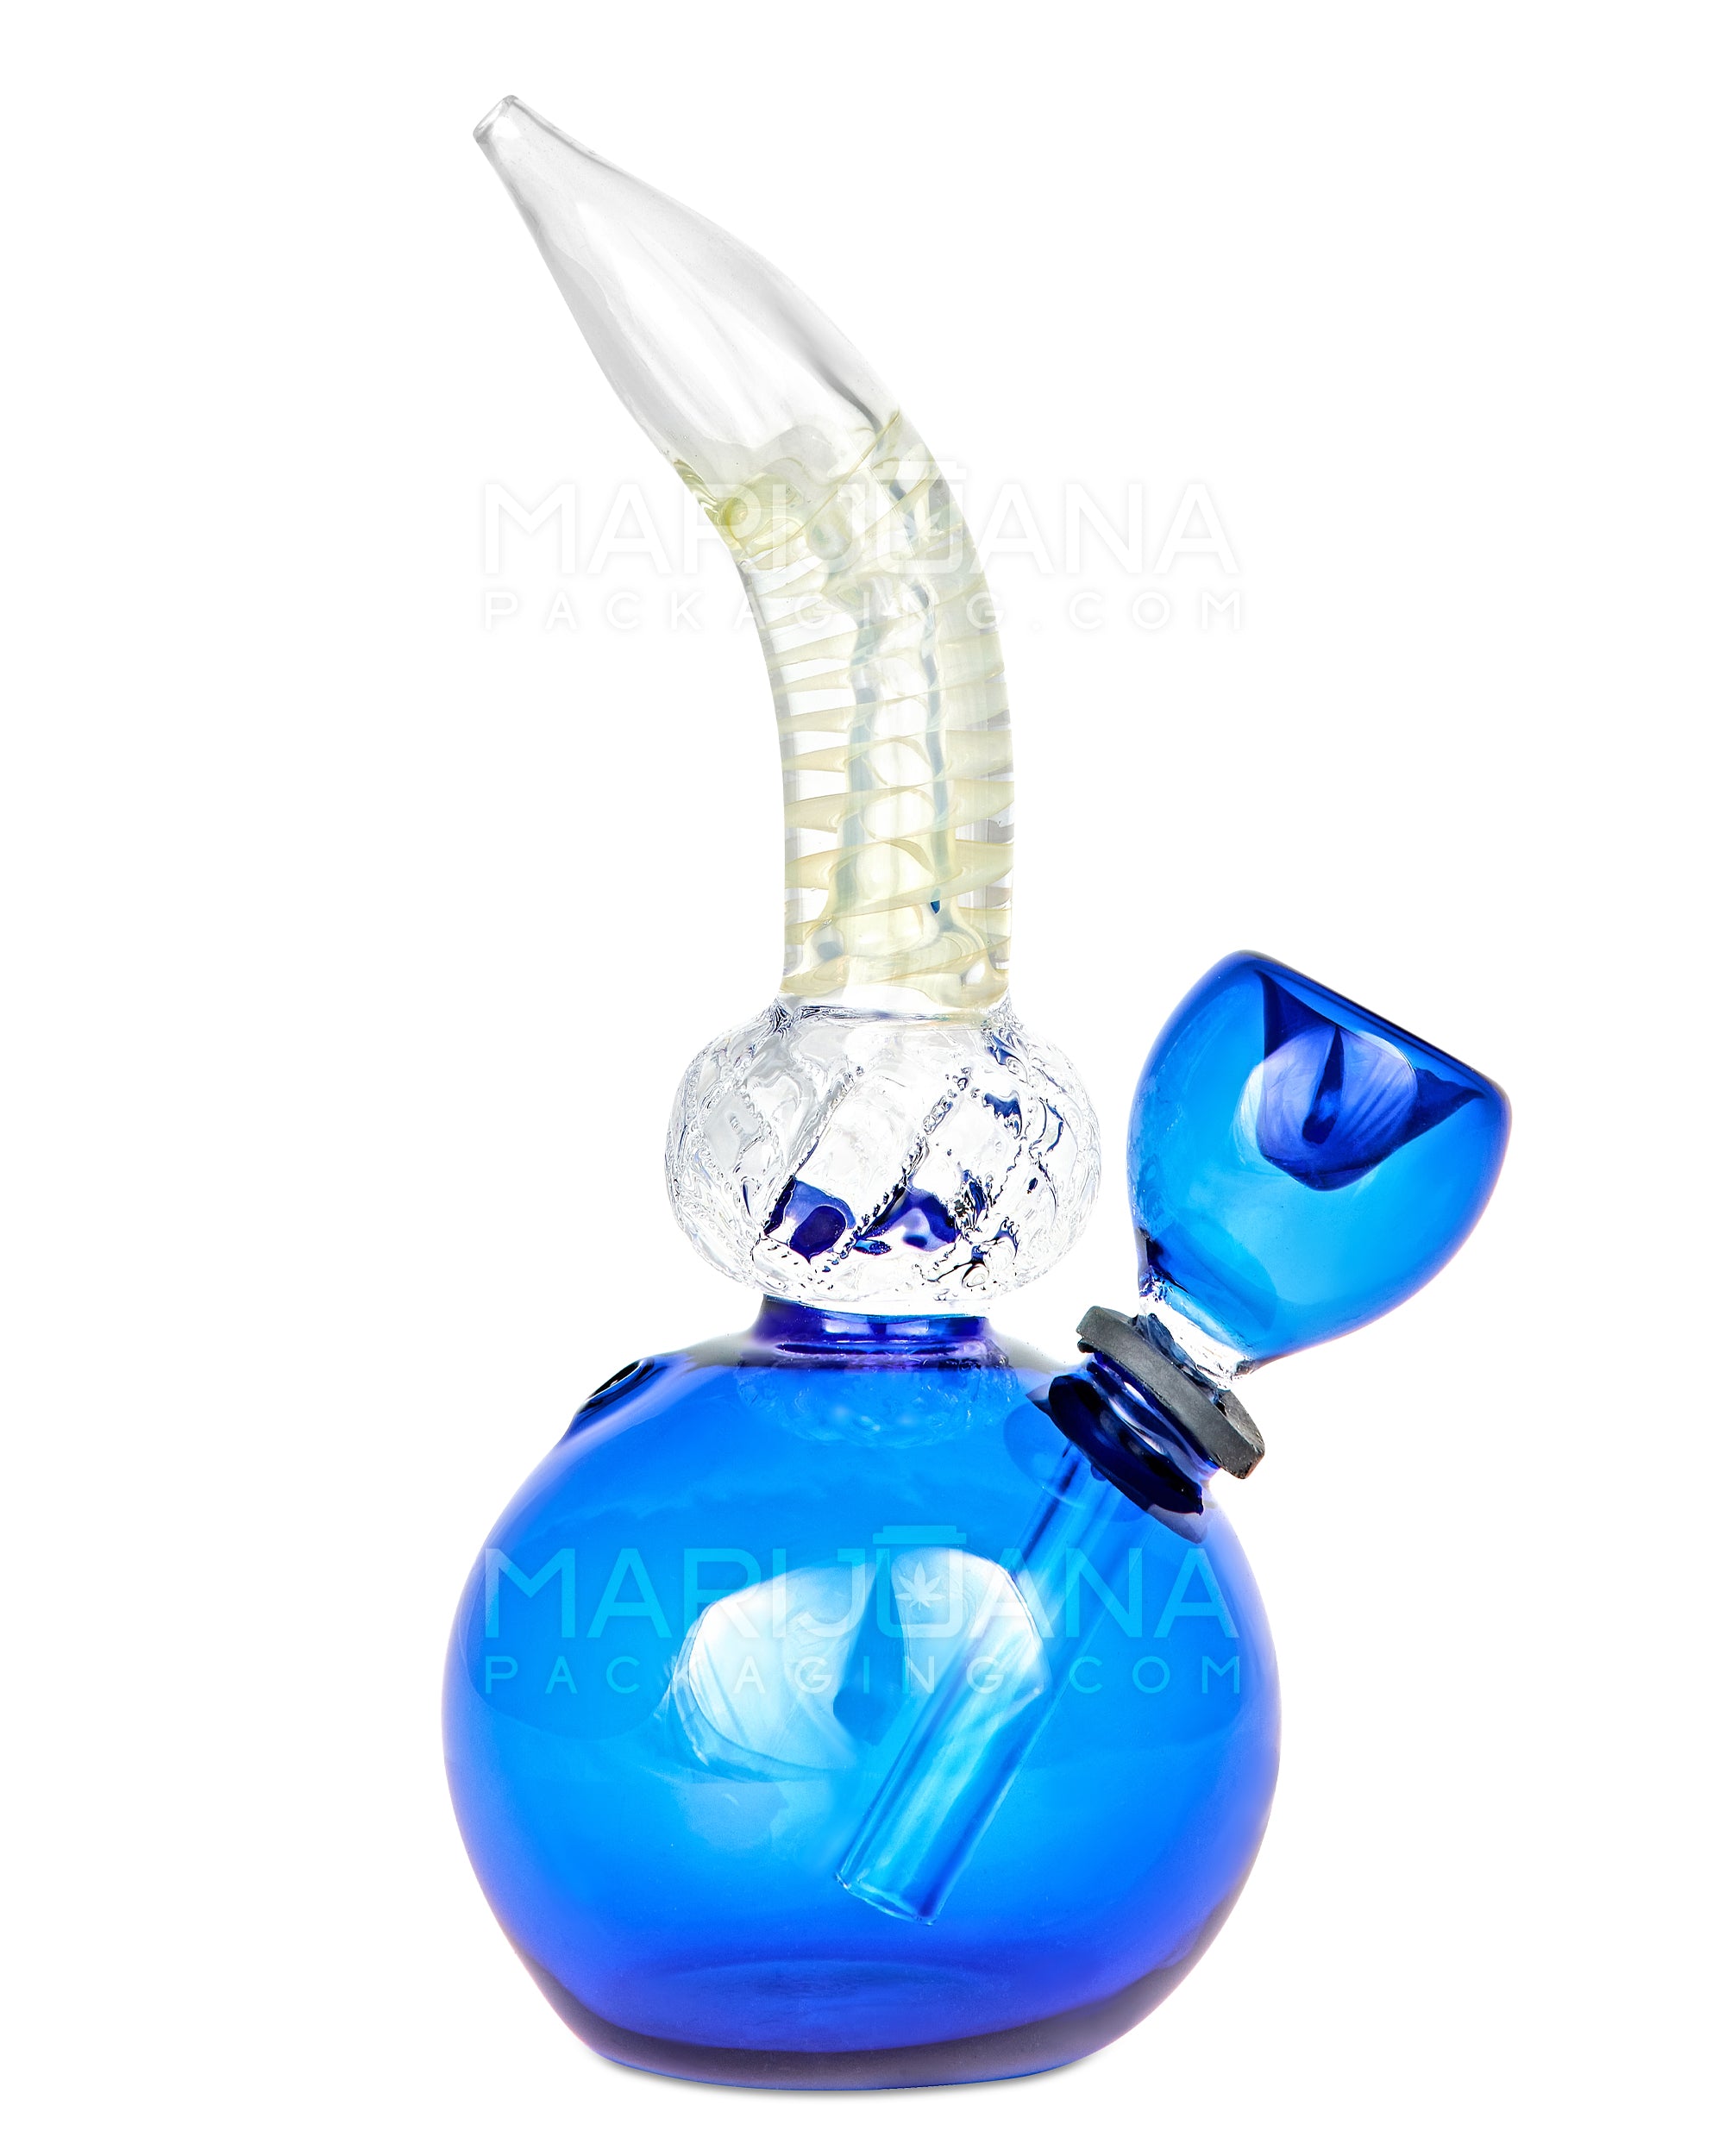 Bent Neck Glass Egg Water Pipe | 6in Tall - Grommet Bowl - Blue - 1